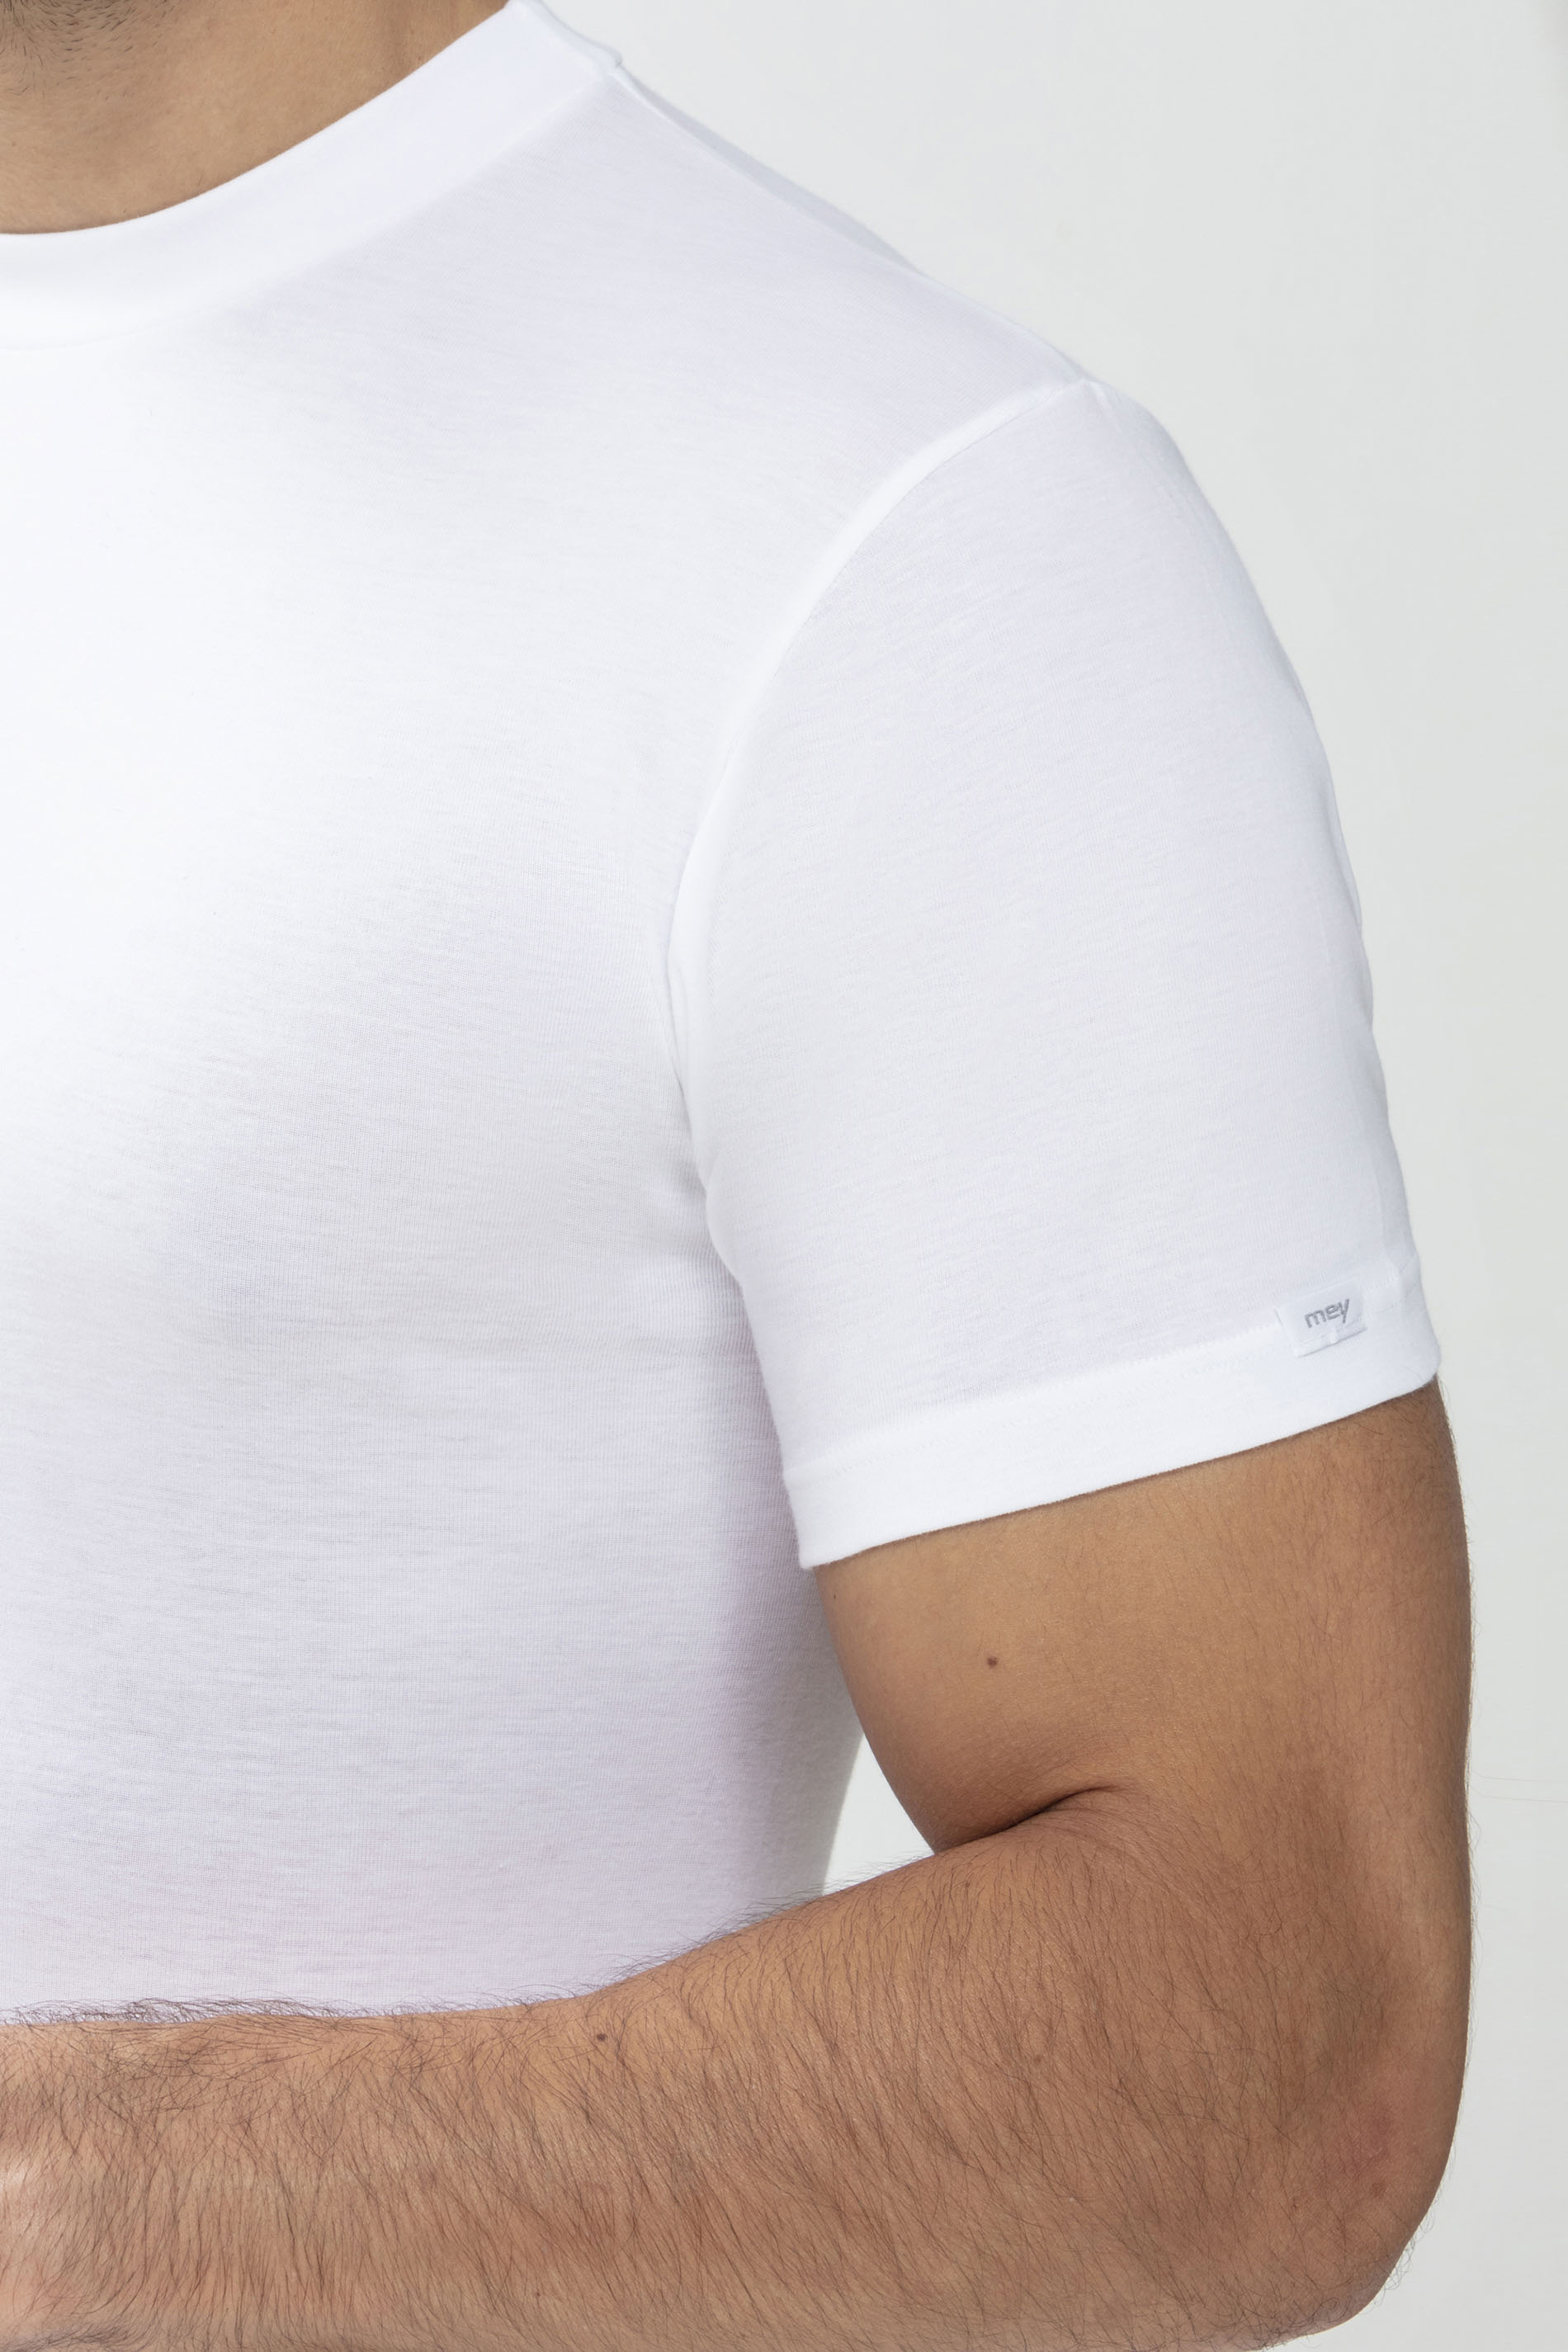 Olympia-Shirt White Serie Noblesse Detail View 01 | mey®